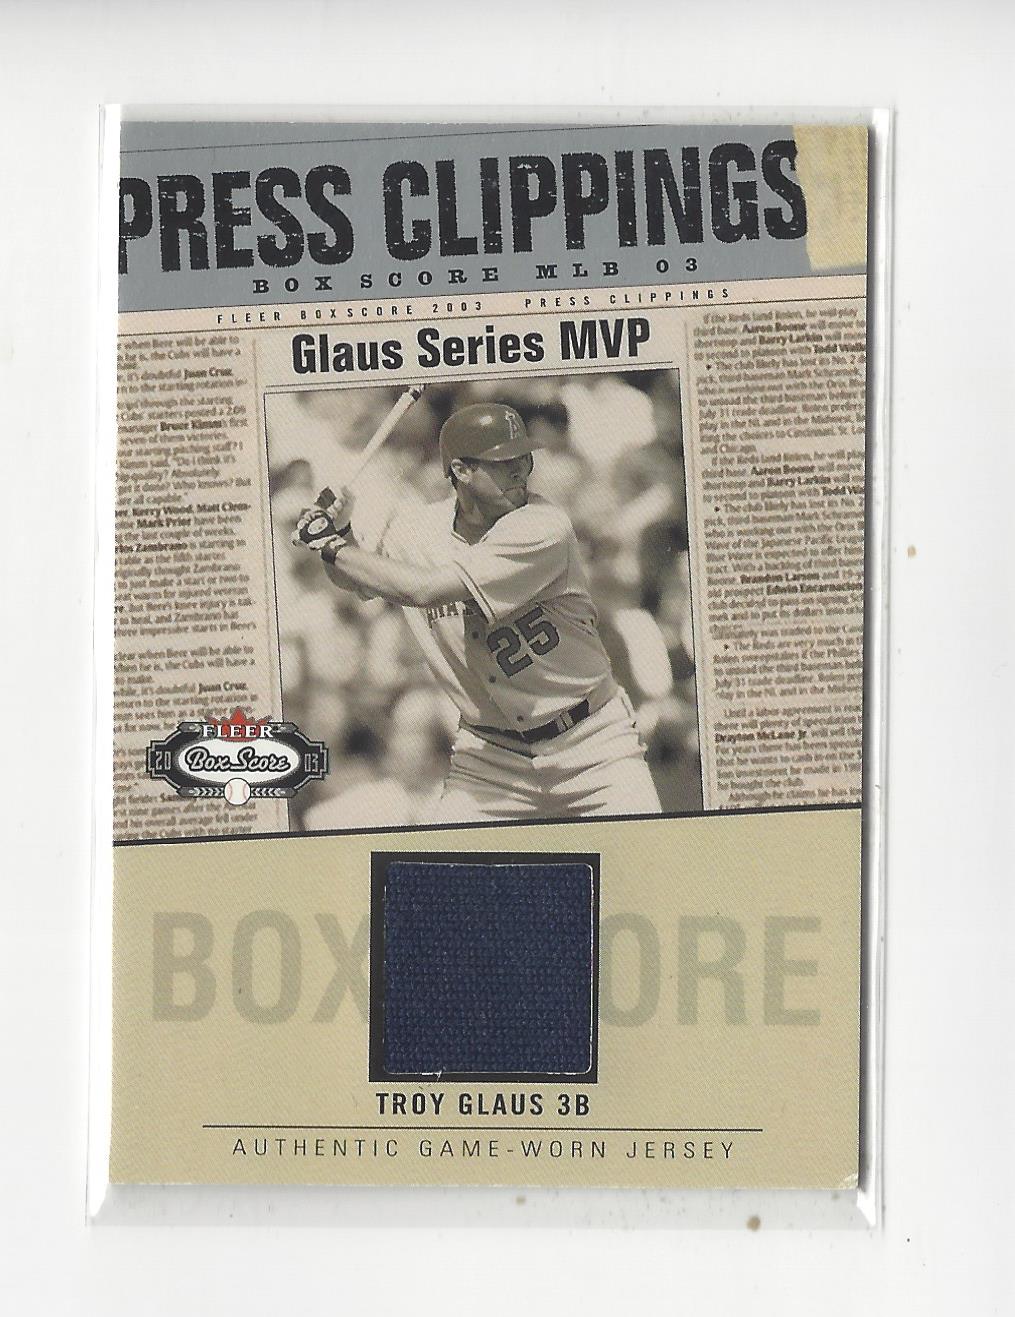 2003 Fleer Box Score Press Clippings Game Jersey #TG Troy Glaus